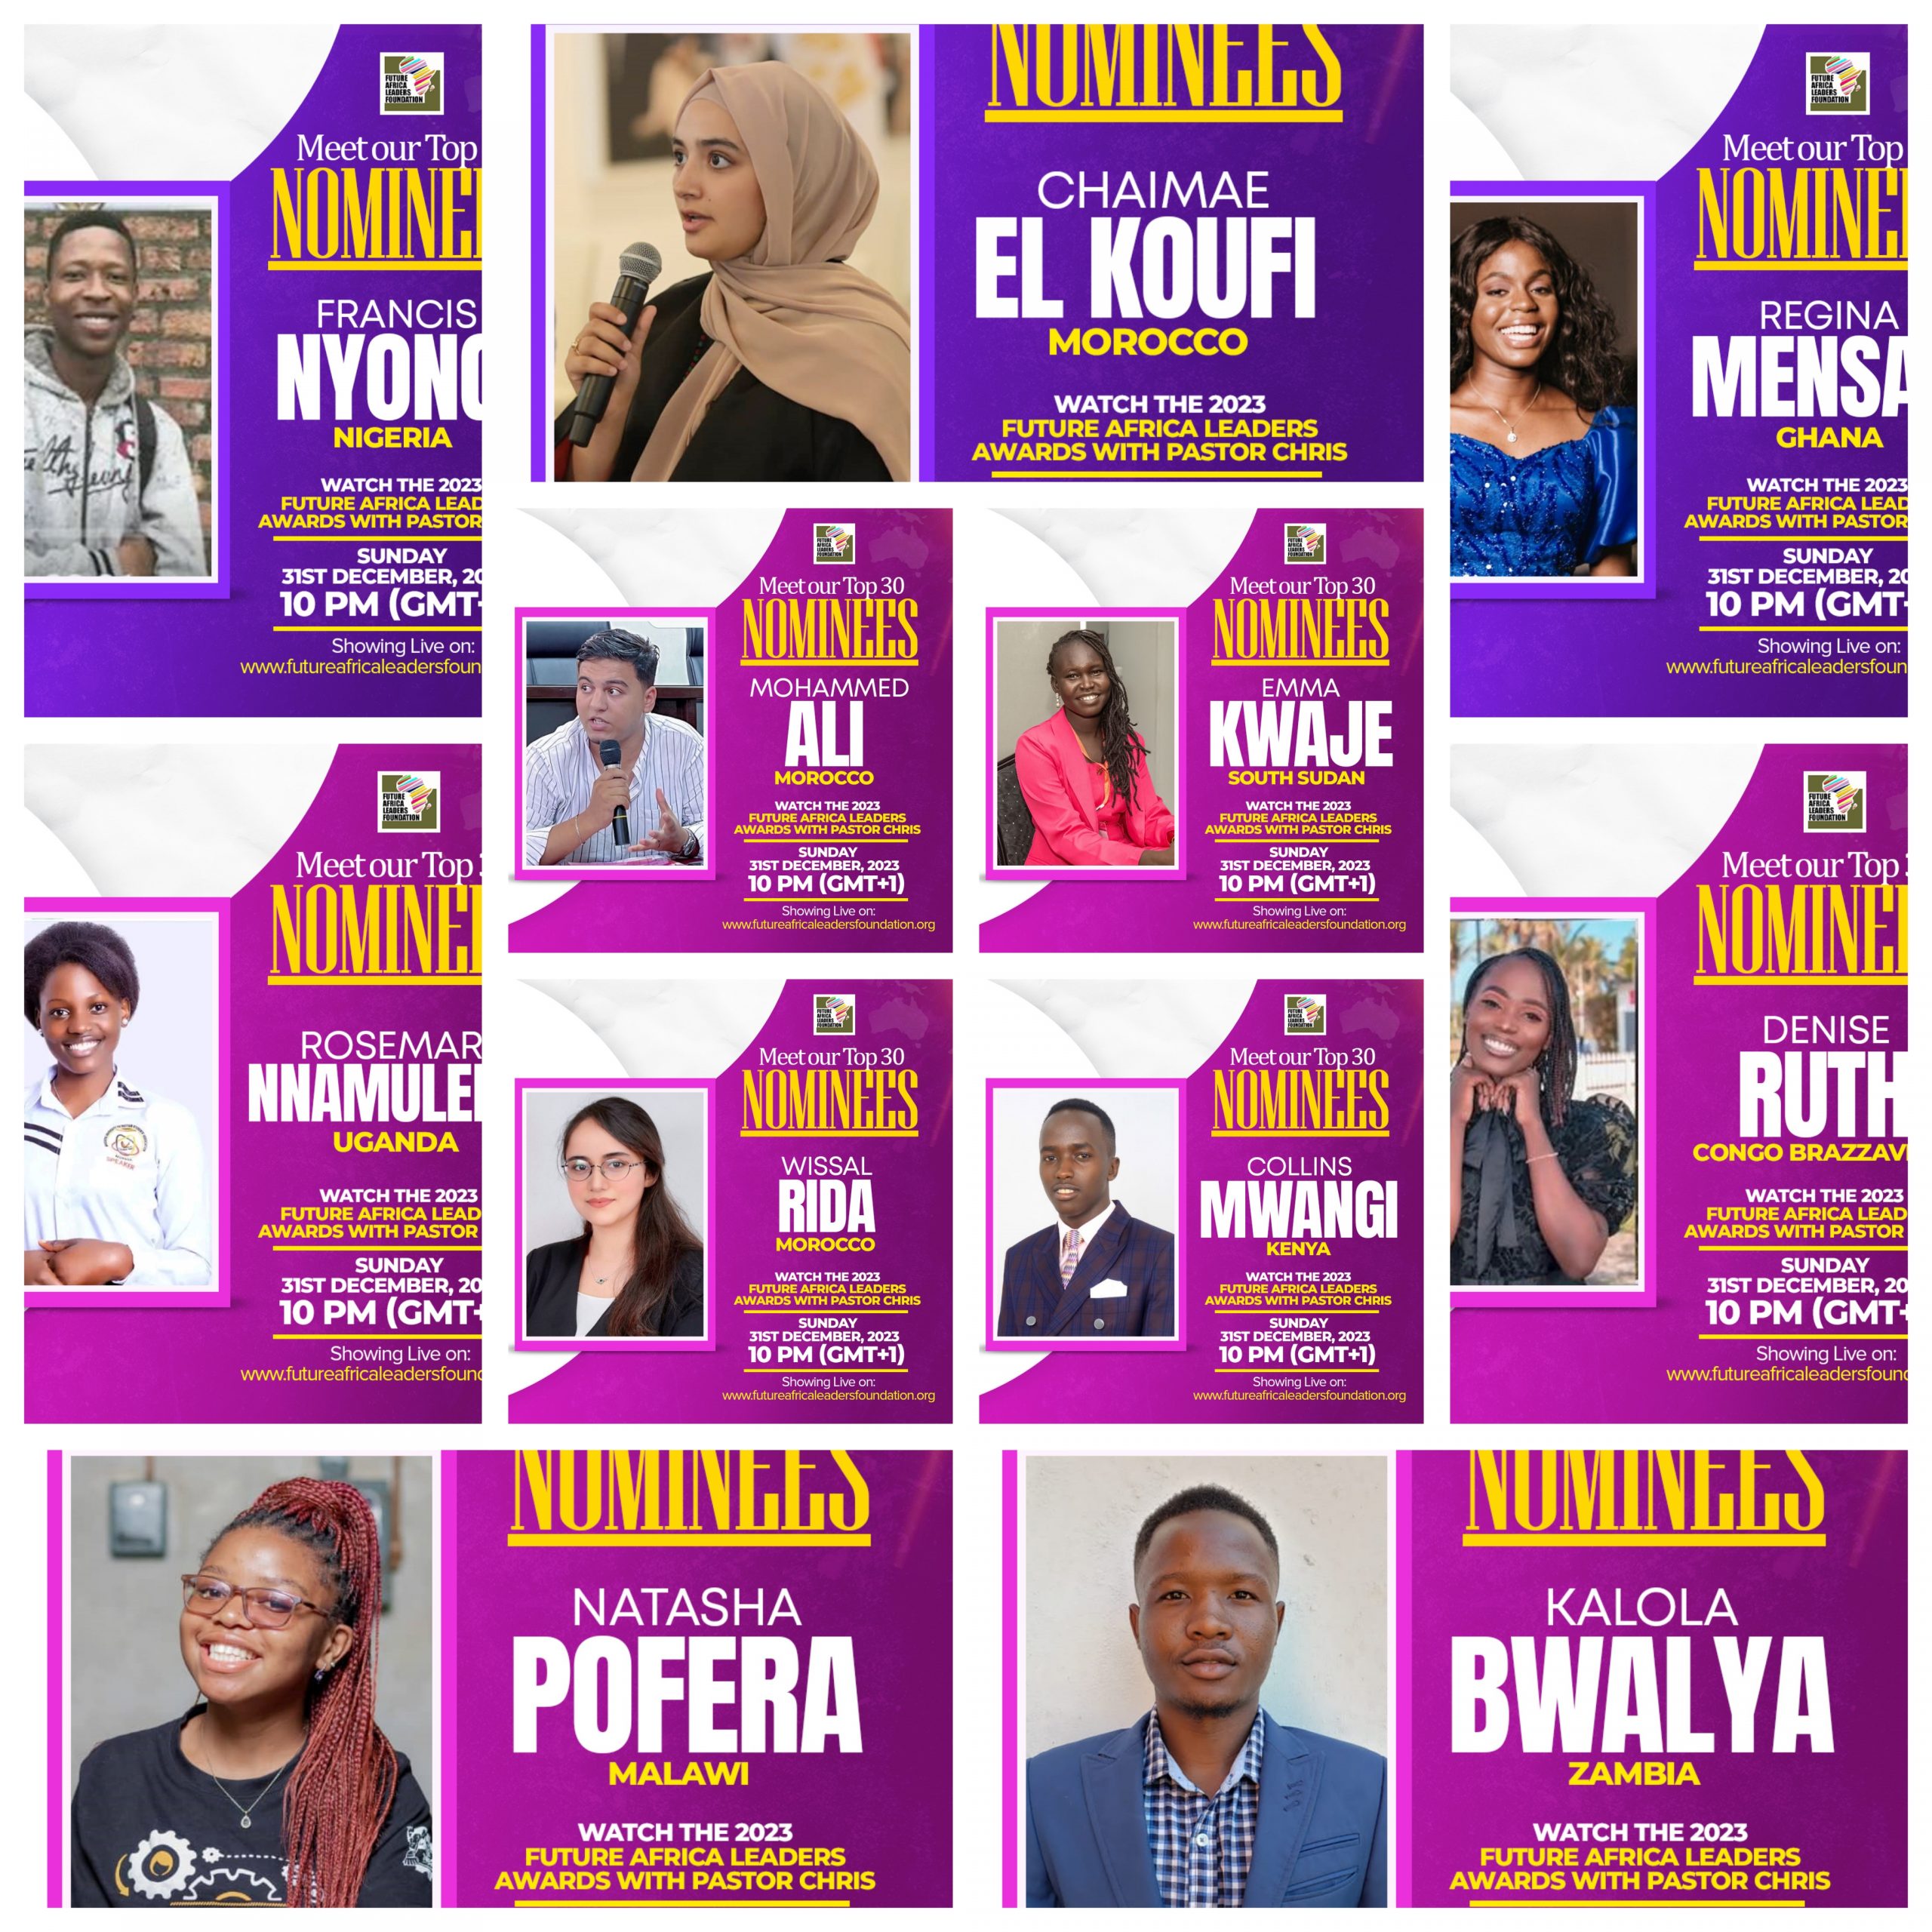 FALF announces 30 nominees for 2023 Future Africa Leaders Awards